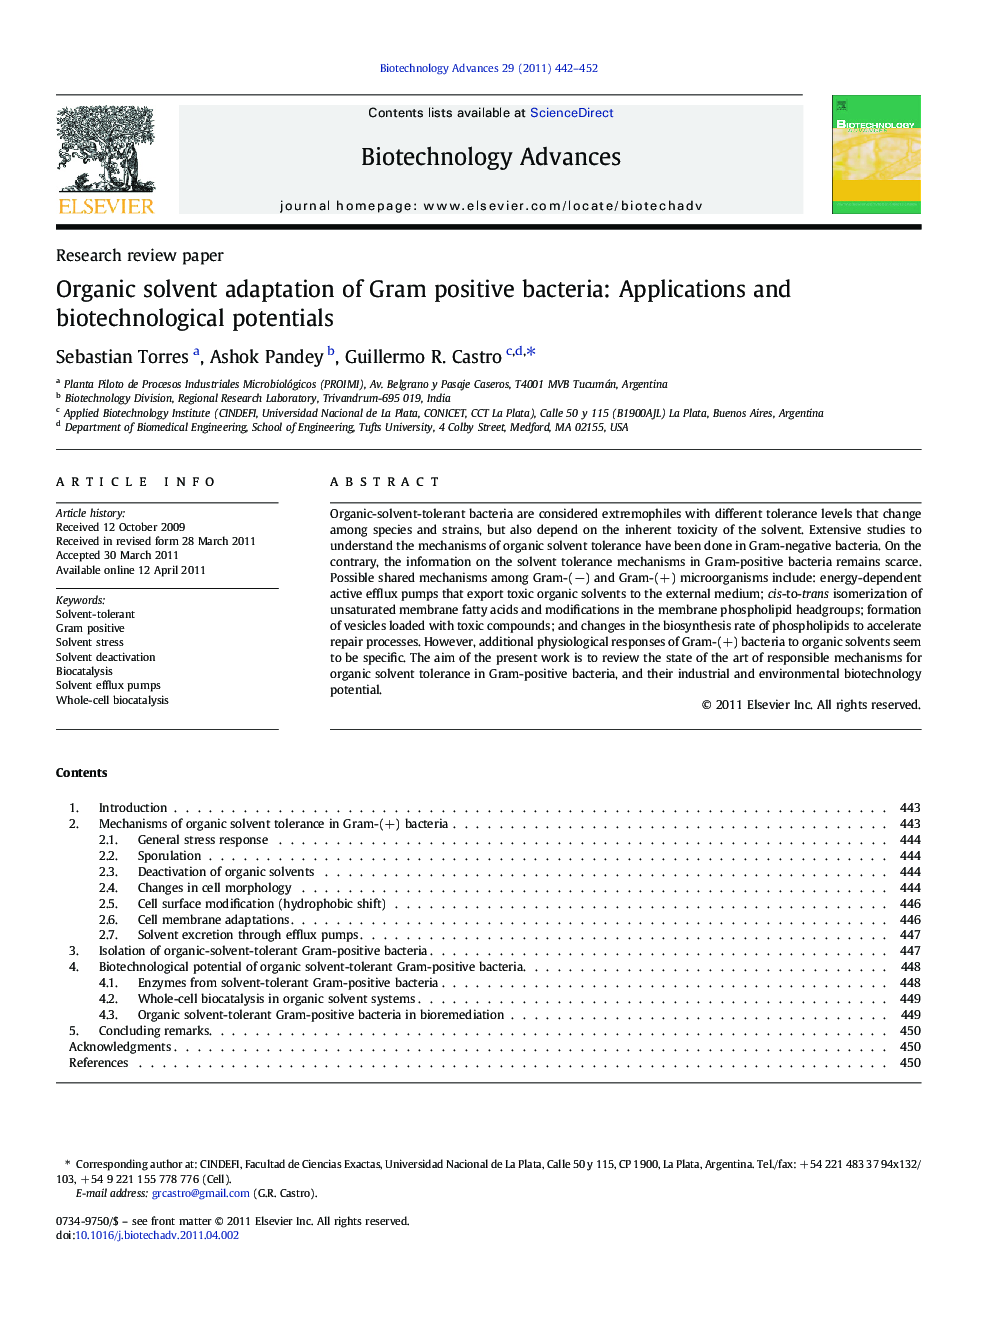 Organic solvent adaptation of Gram positive bacteria: Applications and biotechnological potentials